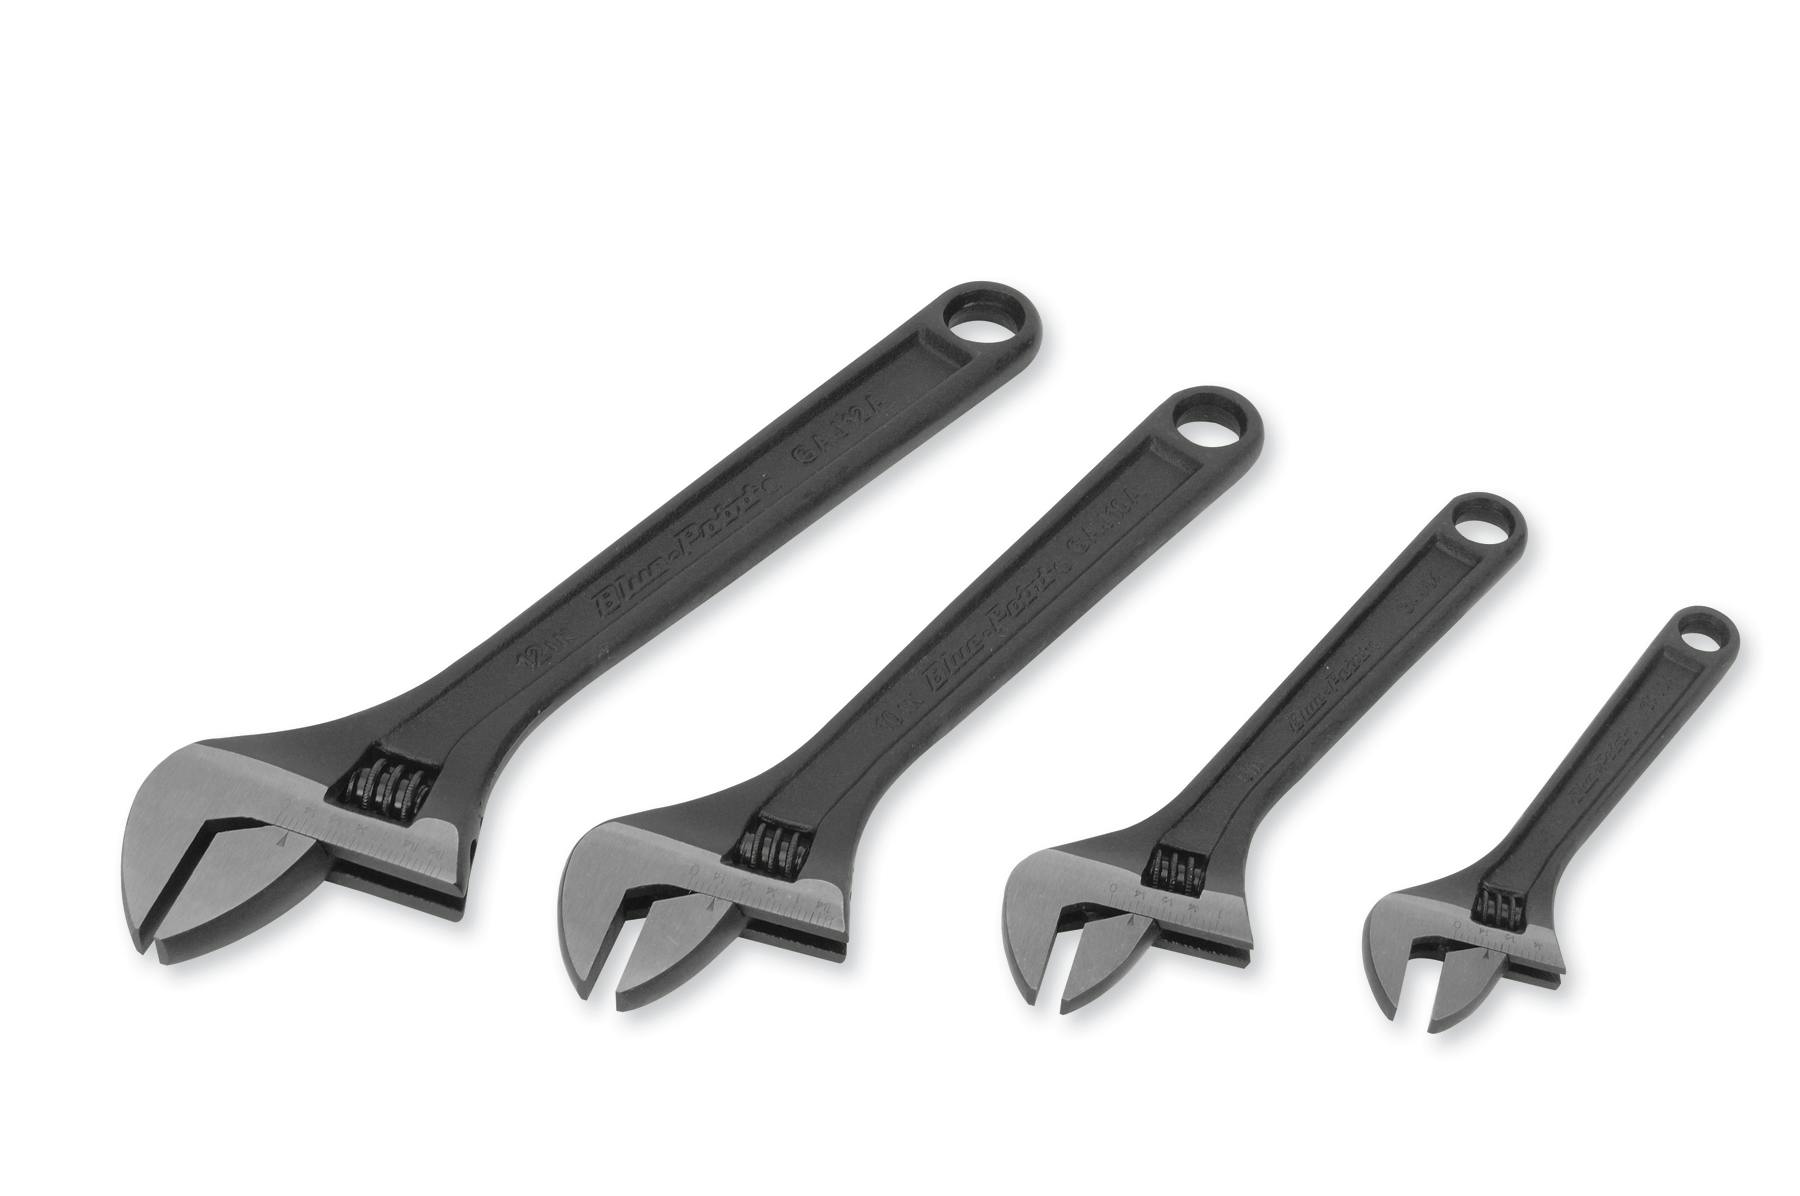 Details about   HIGH QUALITY LOT OF 2 PCS ADJUSTABLE WRENCH SPANNERS WITH SOFT GRIP 4" 100MM 